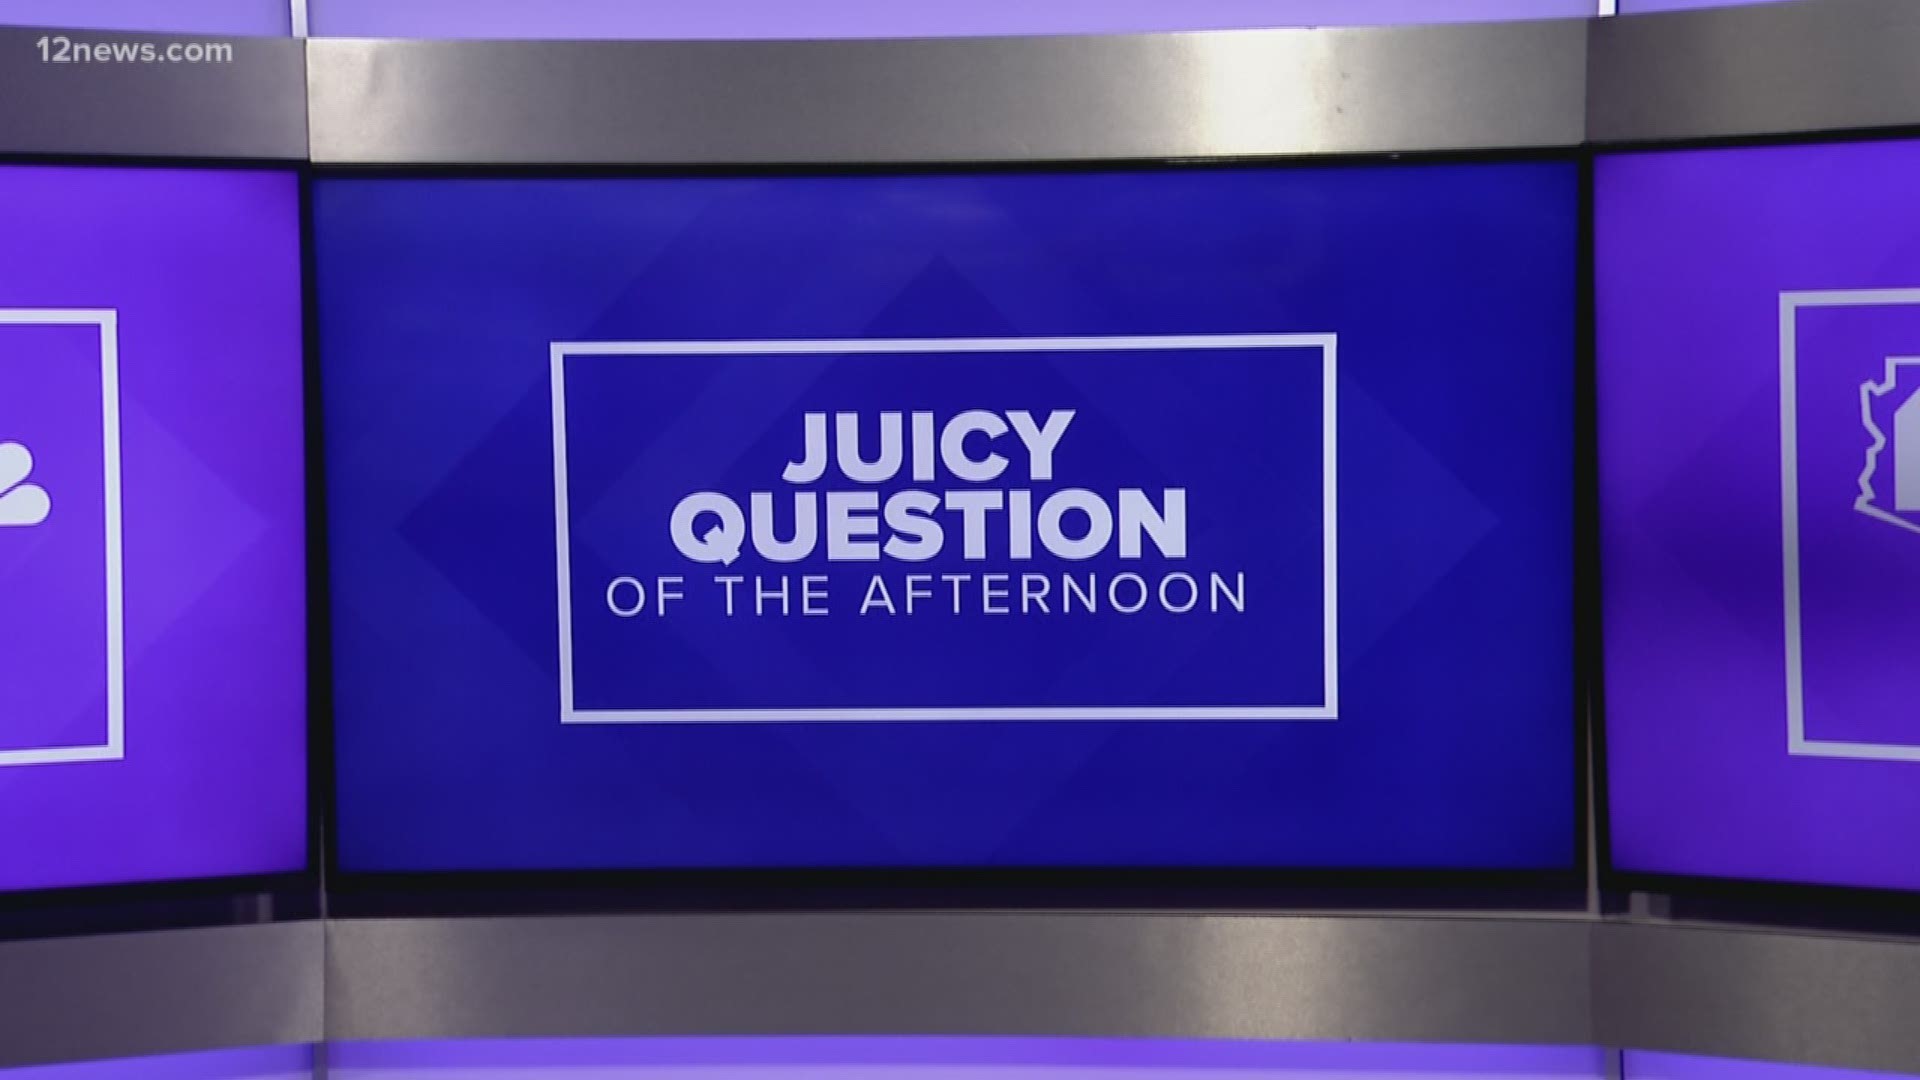 Juicy question of the afternoon: 24% of people say this is actually a stressful way to spend the holidays.